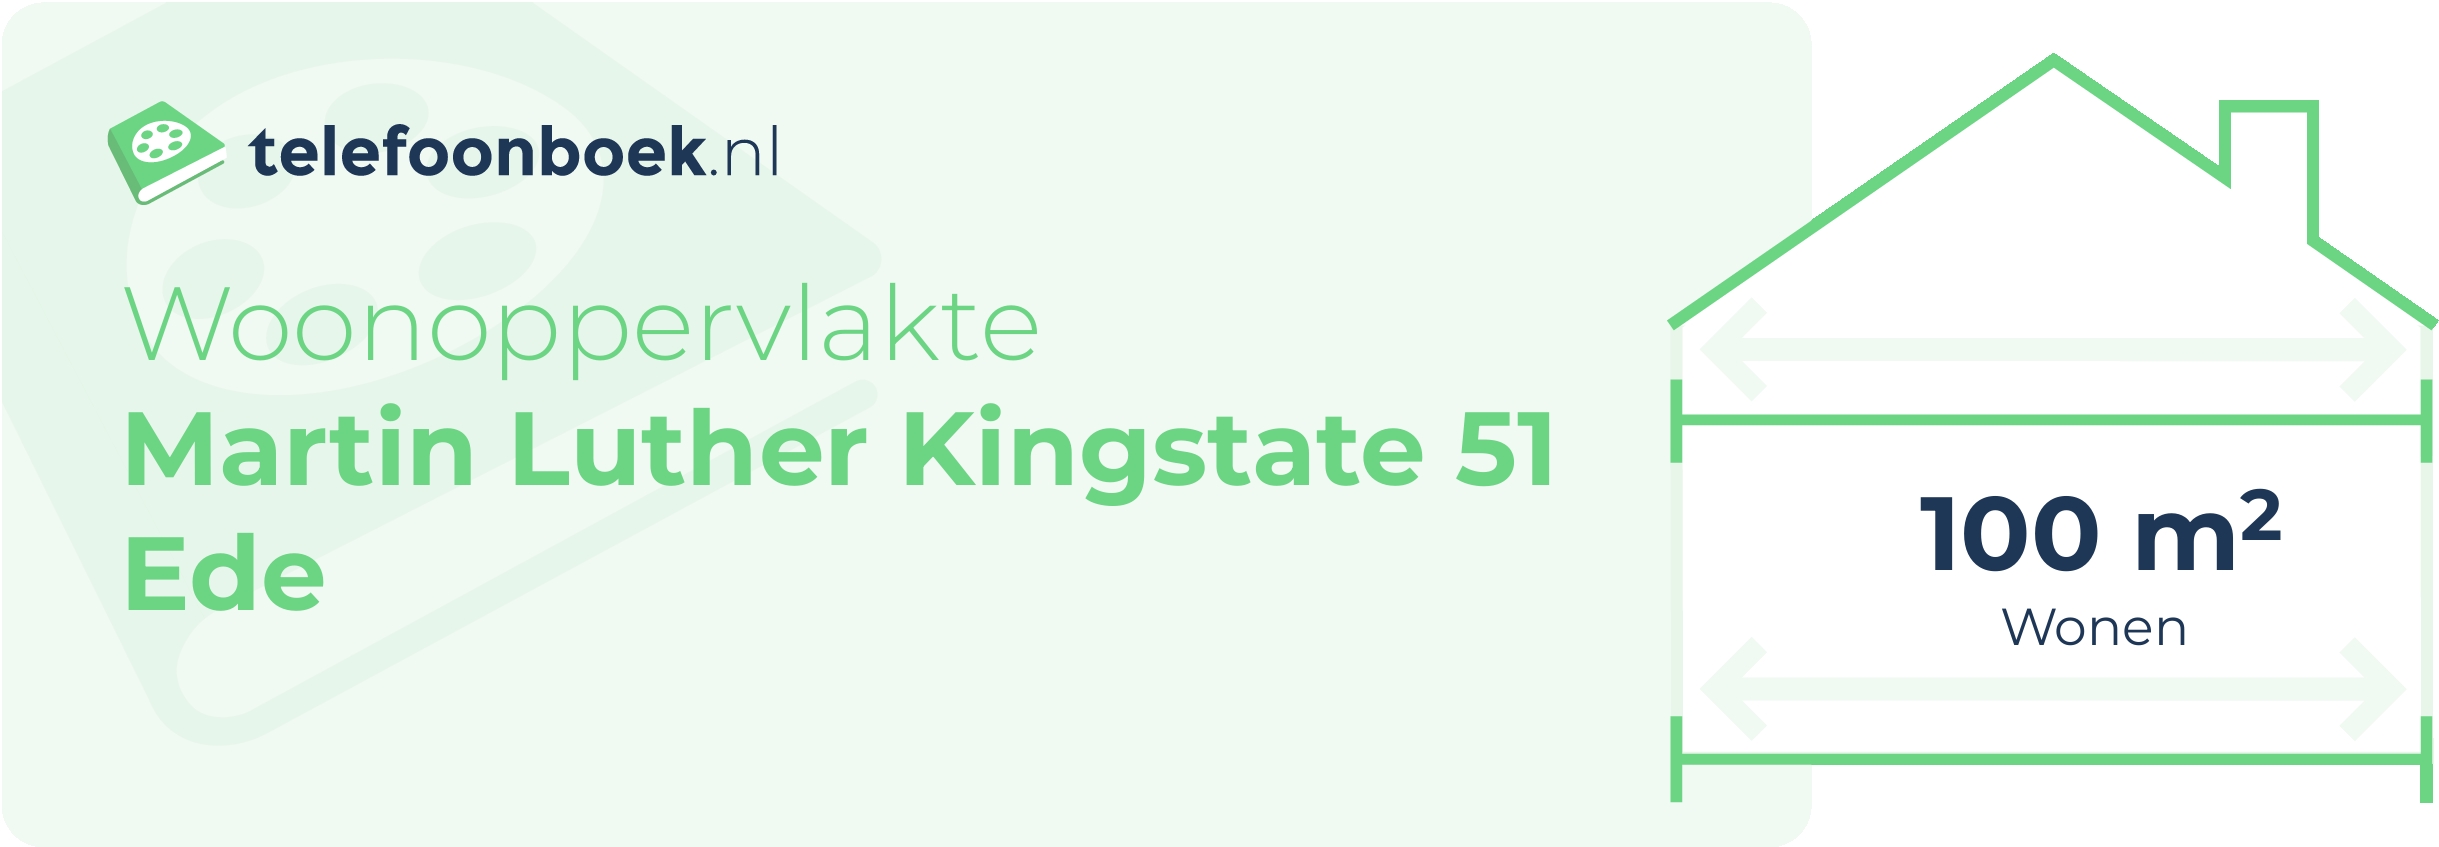 Woonoppervlakte Martin Luther Kingstate 51 Ede